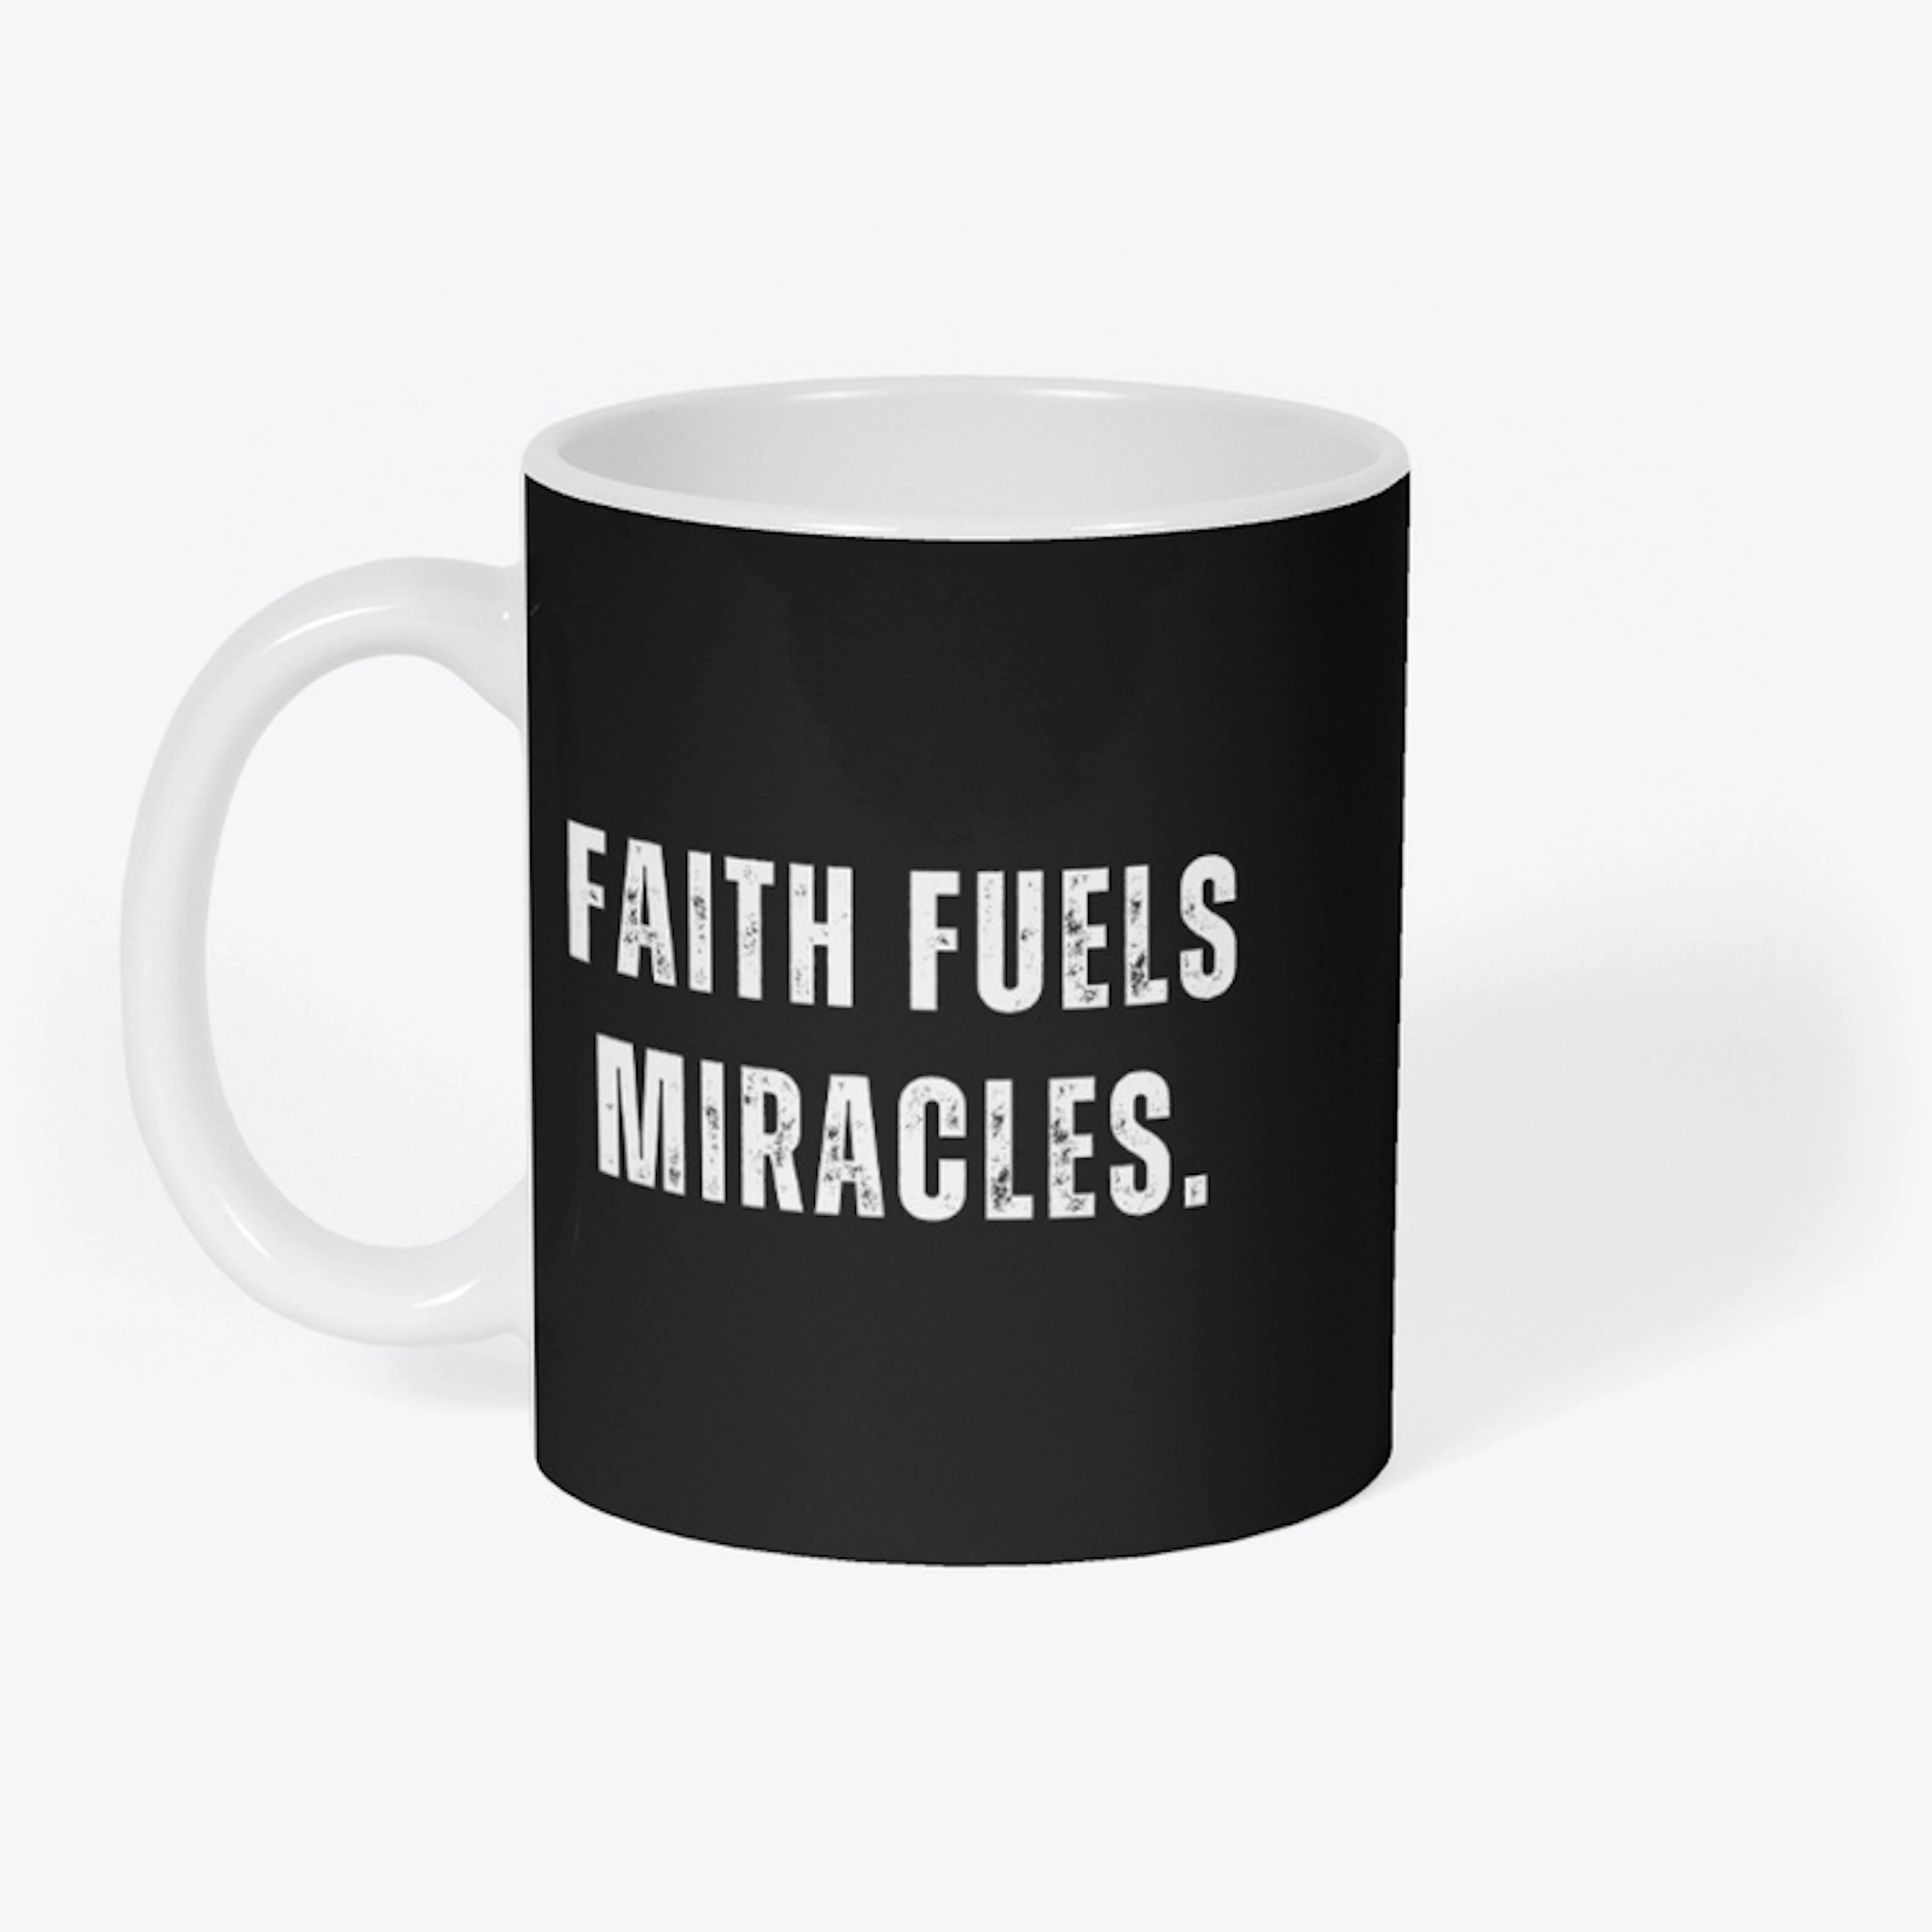 Faith fuels miracles